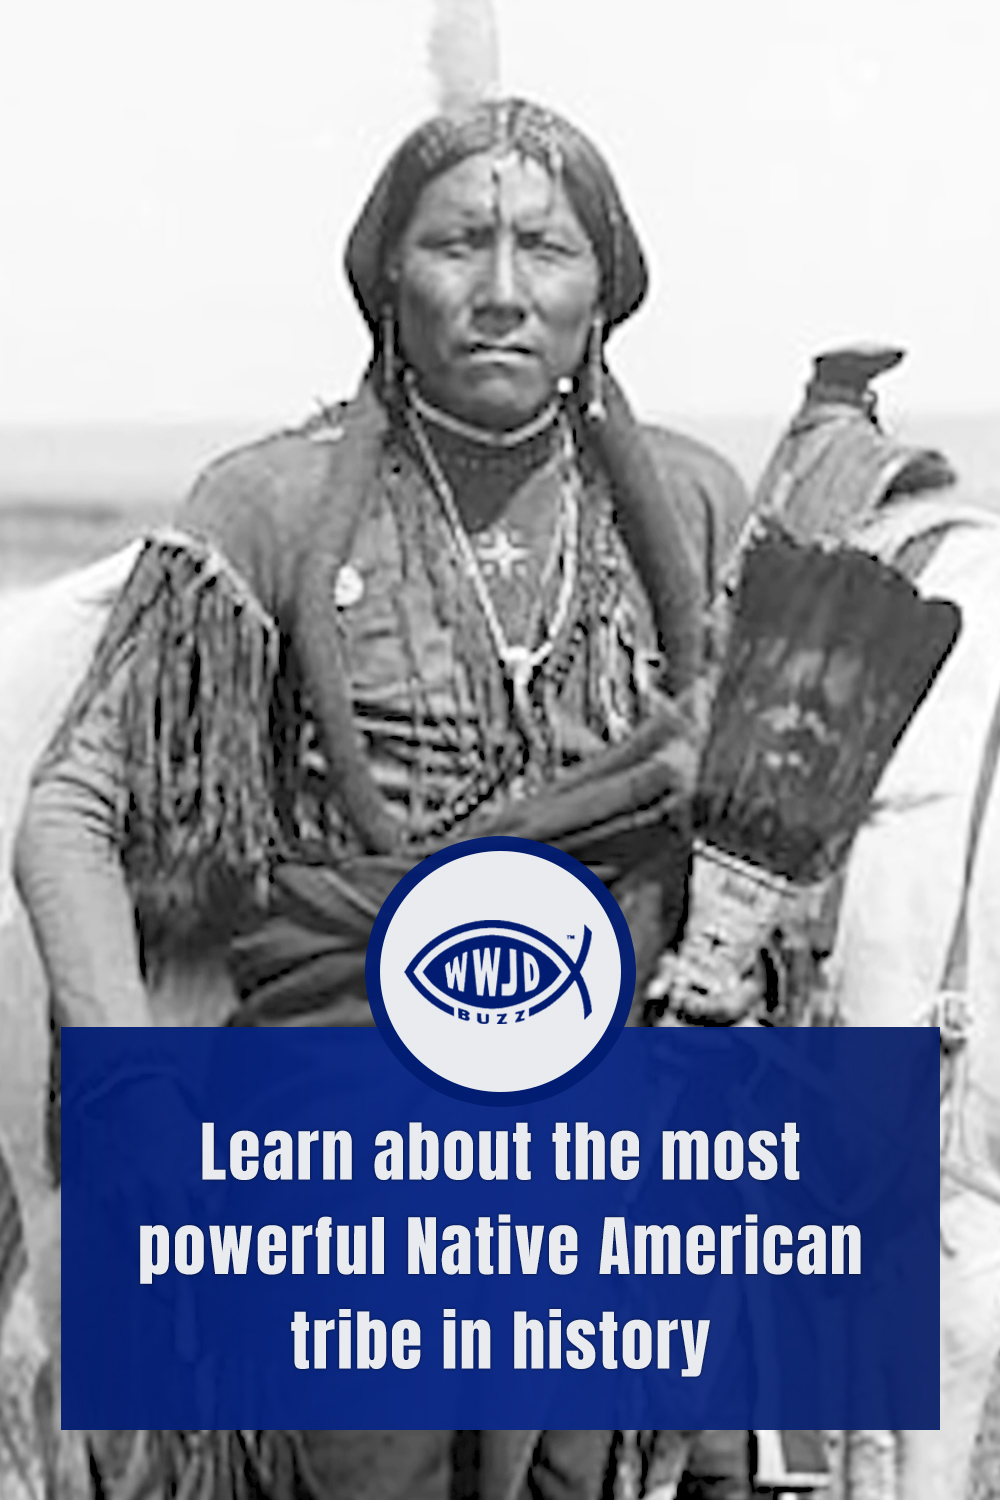 Learn about the most powerful Native American tribe in history